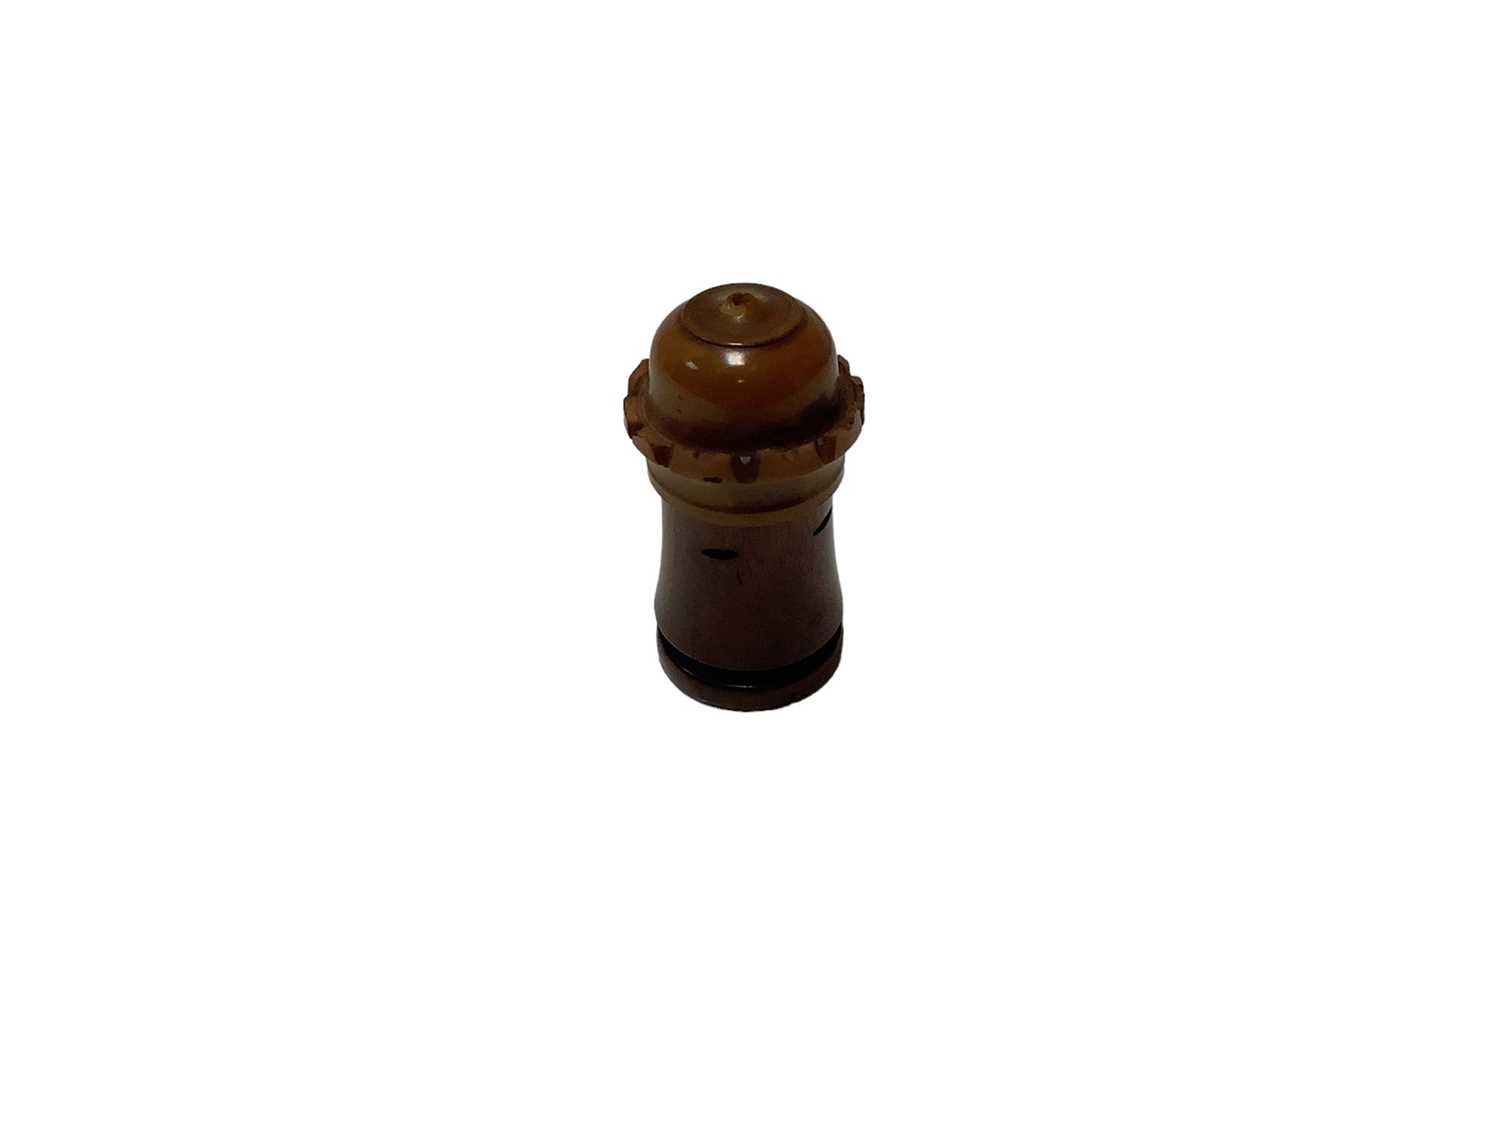 Lot 83 - Victorian novelty Chess piece Vesta case with turned wood and nut body and striking plate to base 50mm